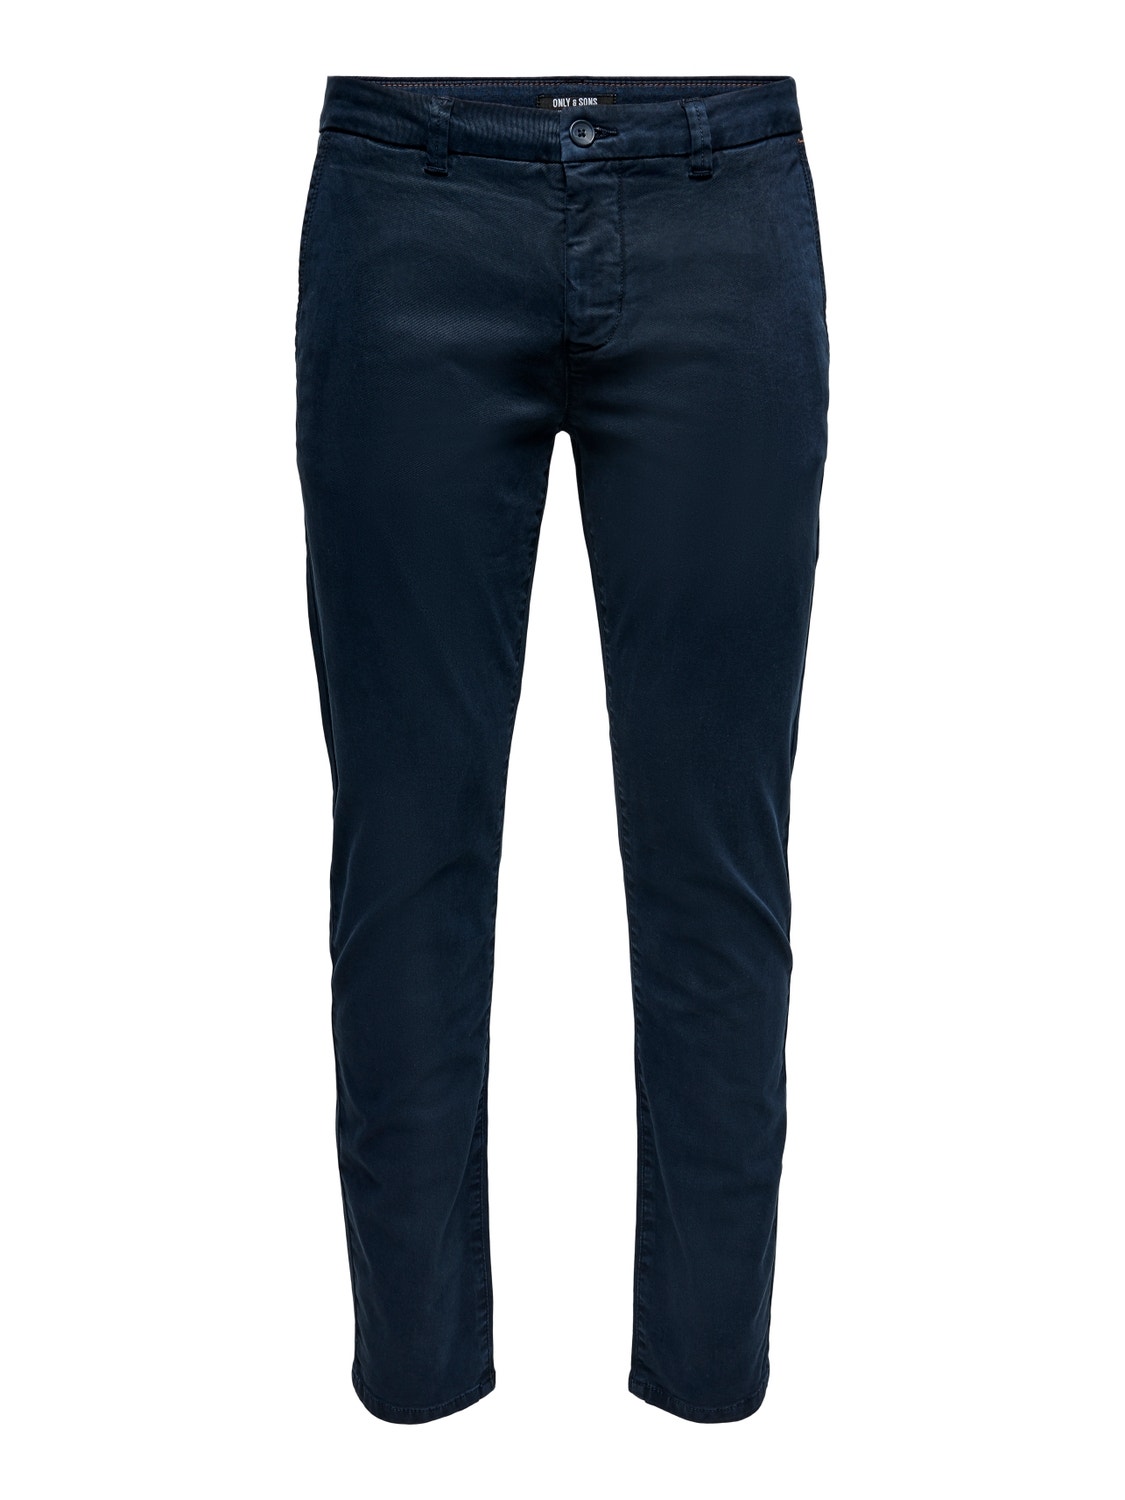 ONLY & SONS Slim Fit Mittlere Taille Chino Hose -Dark Navy - 22019934